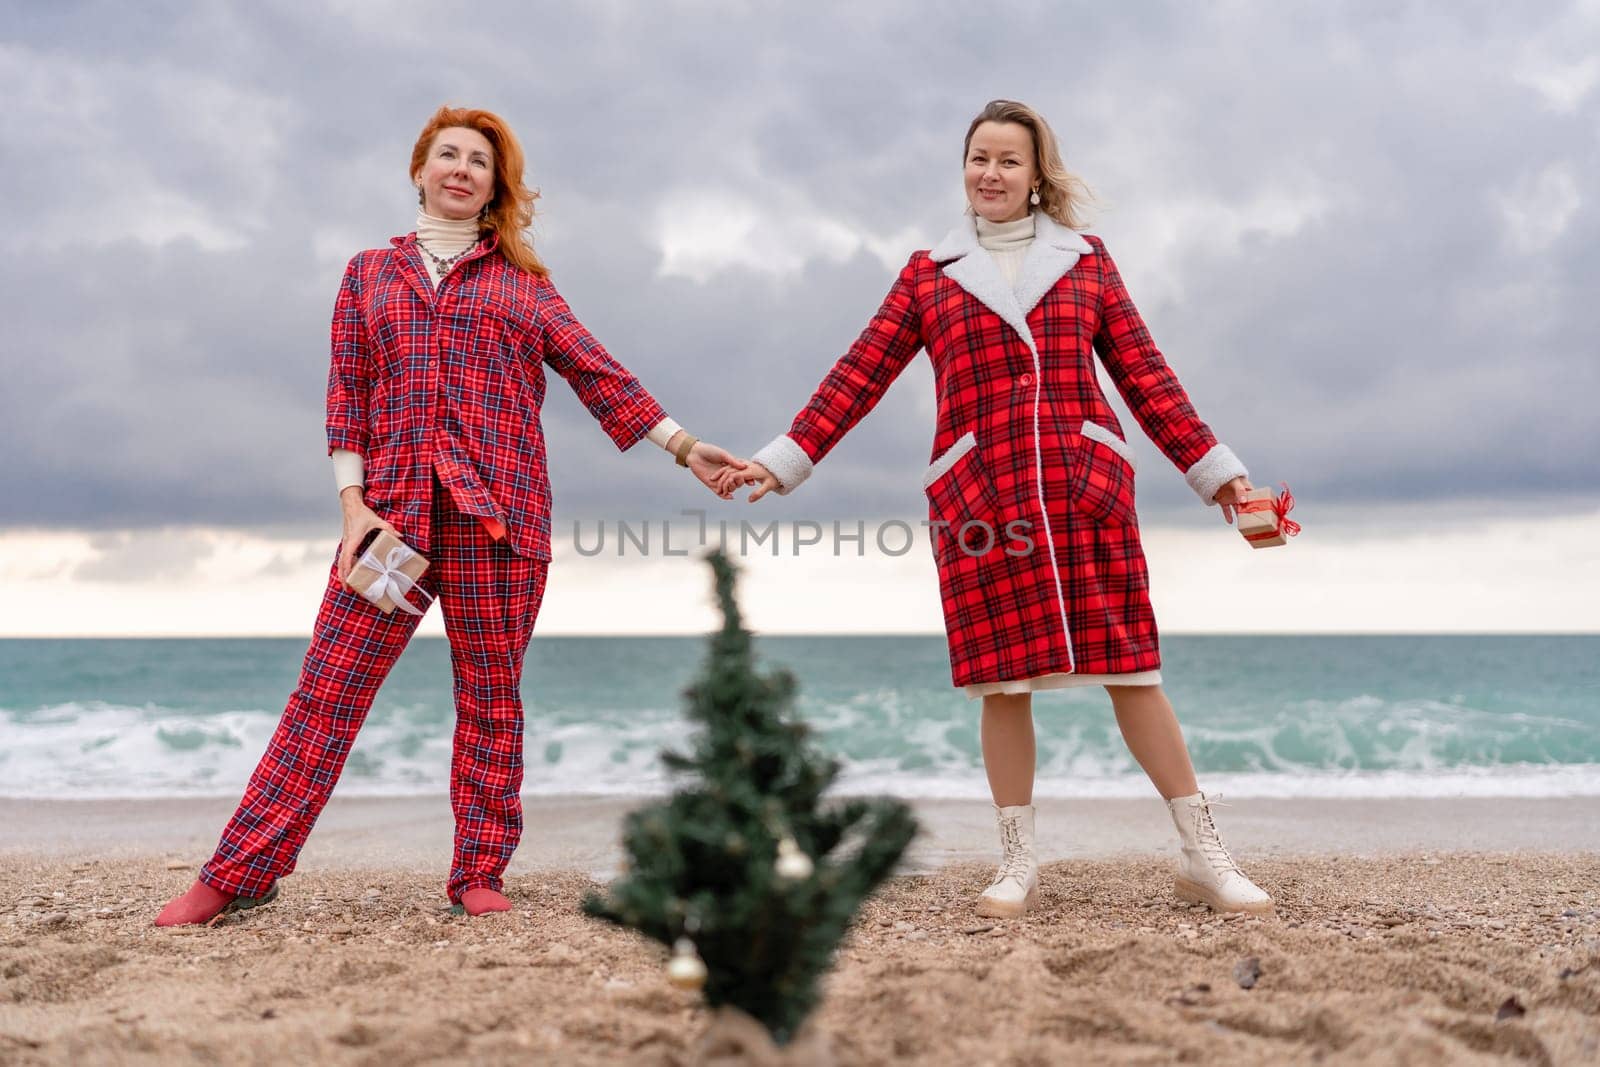 Sea two Lady in plaid shirt with a christmas tree in her hands enjoys beach. Coastal area. Christmas, New Year holidays concep by Matiunina